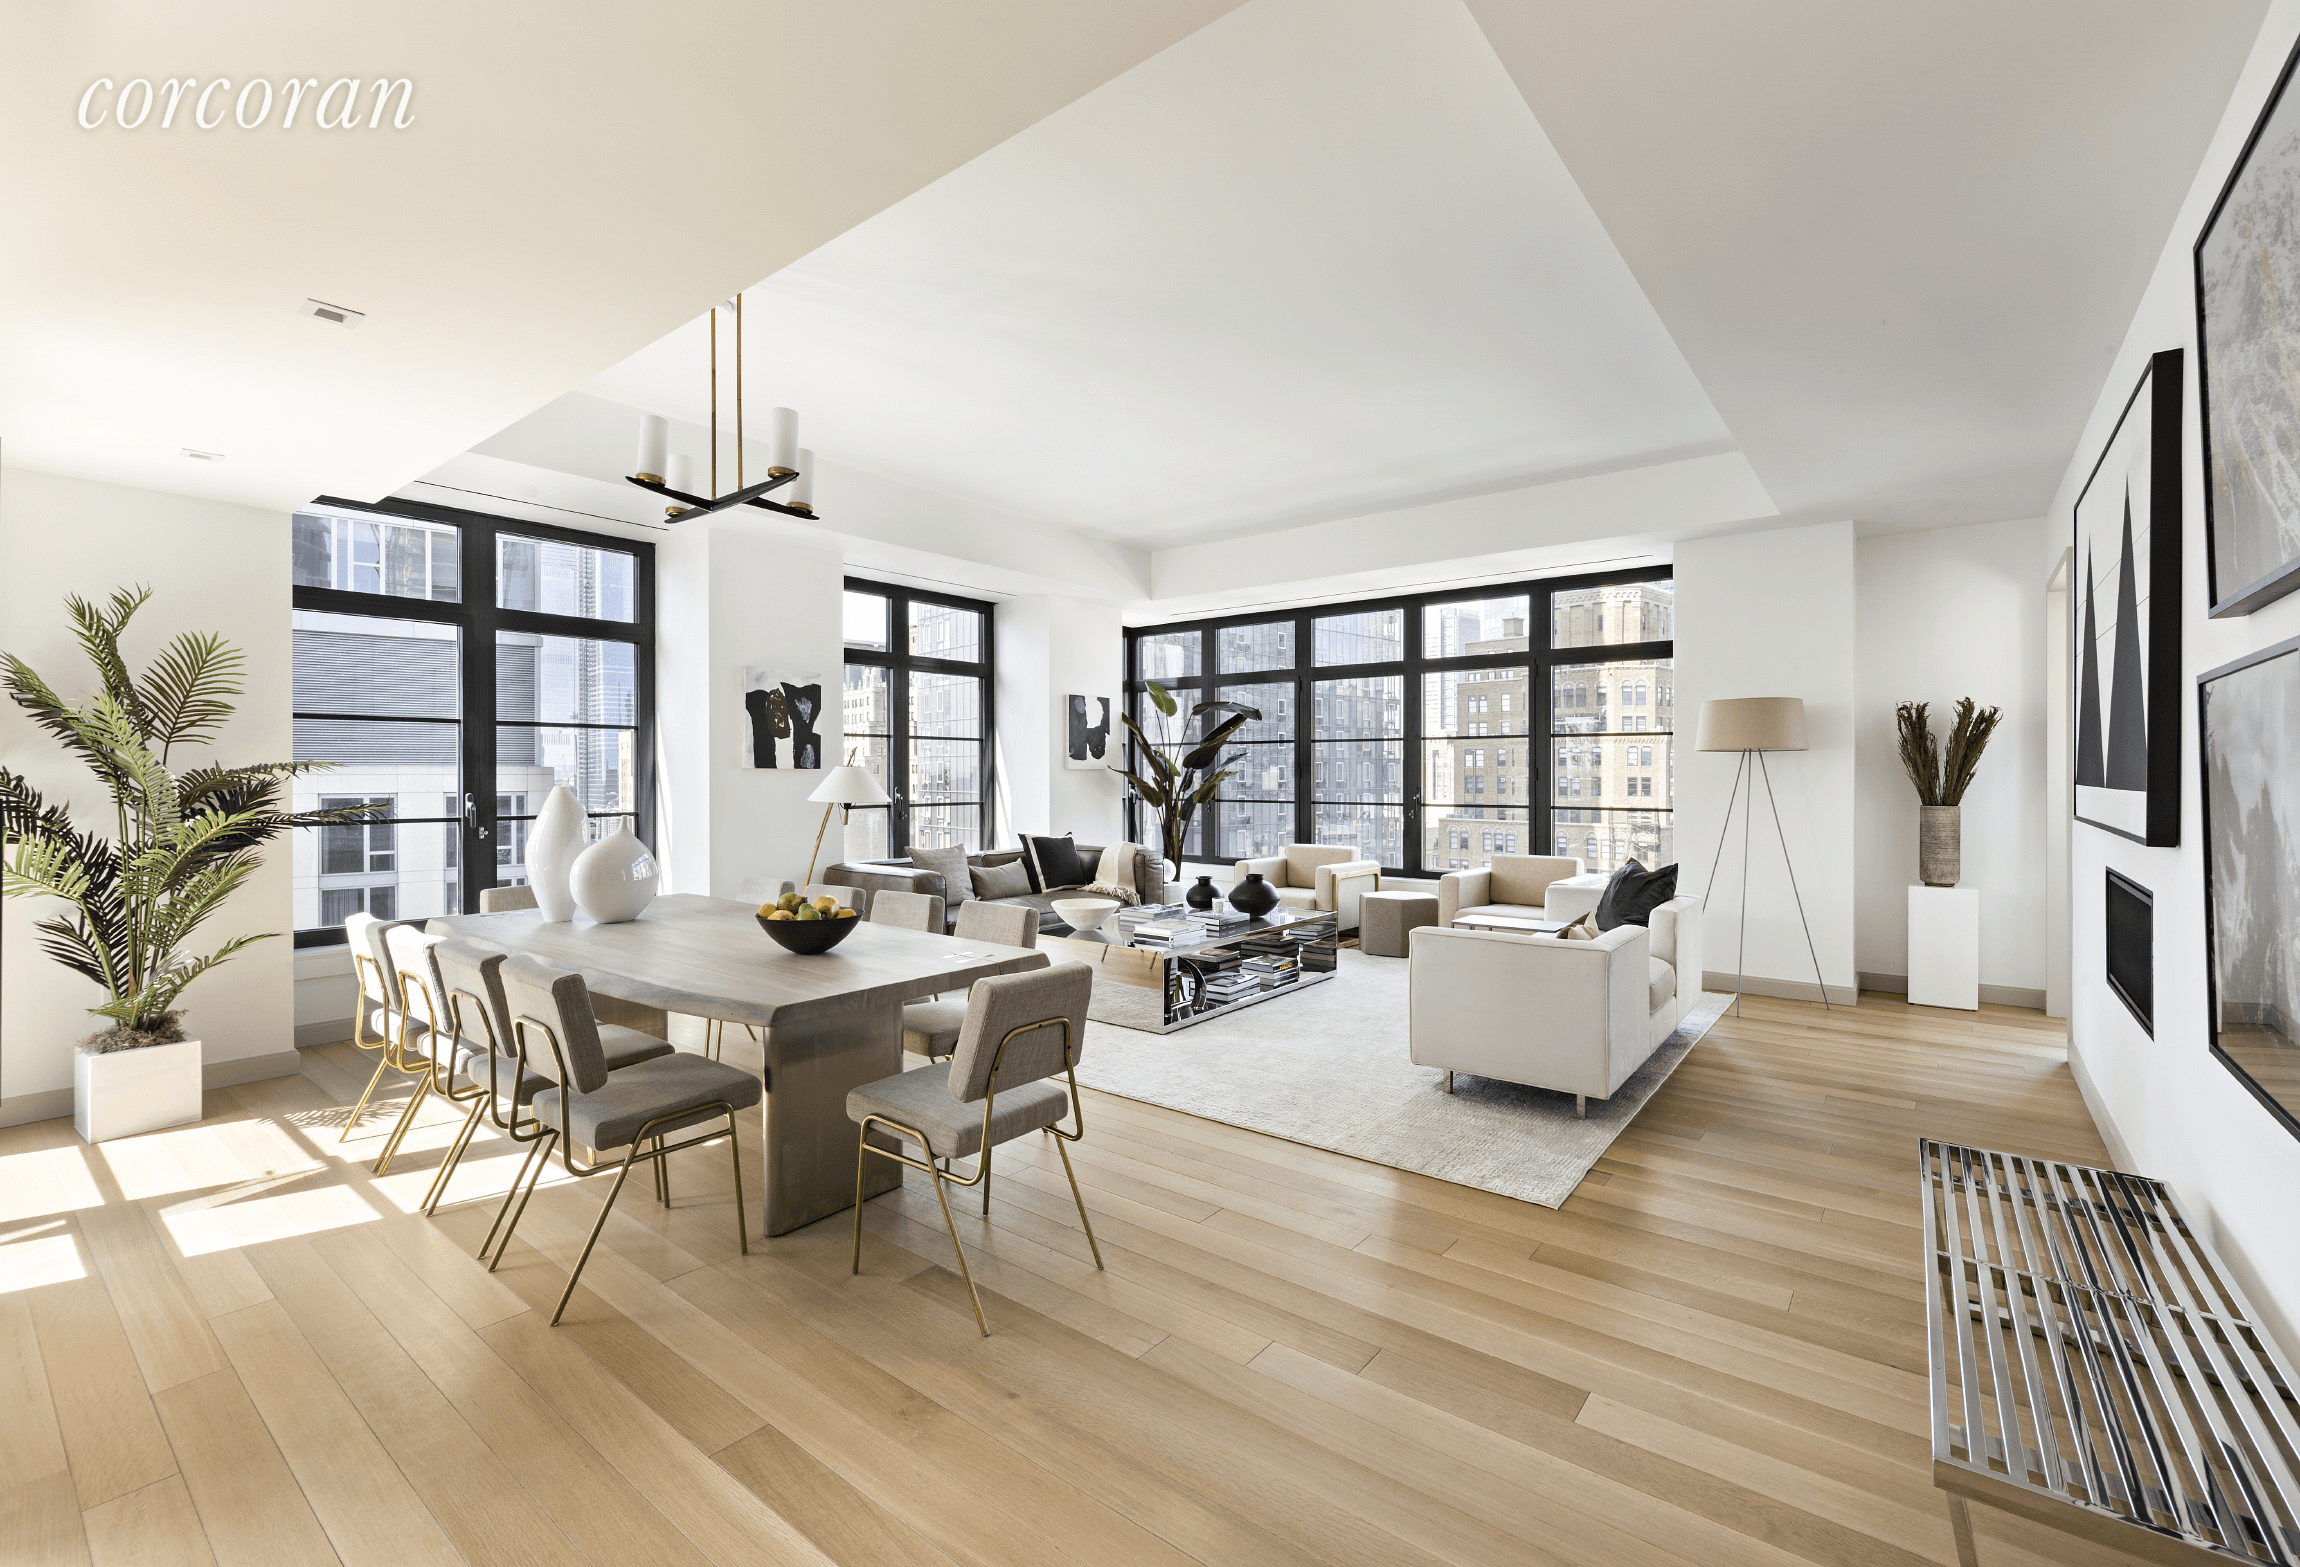 IMMEDIATE OCCUPANCYMOVE RIGHT IN and live on top of NoMad in the heart of Manhattan PENTHOUSE 1 PH1 is a FULL Floor 2, 530 SqFt 3 bedroom, 3.